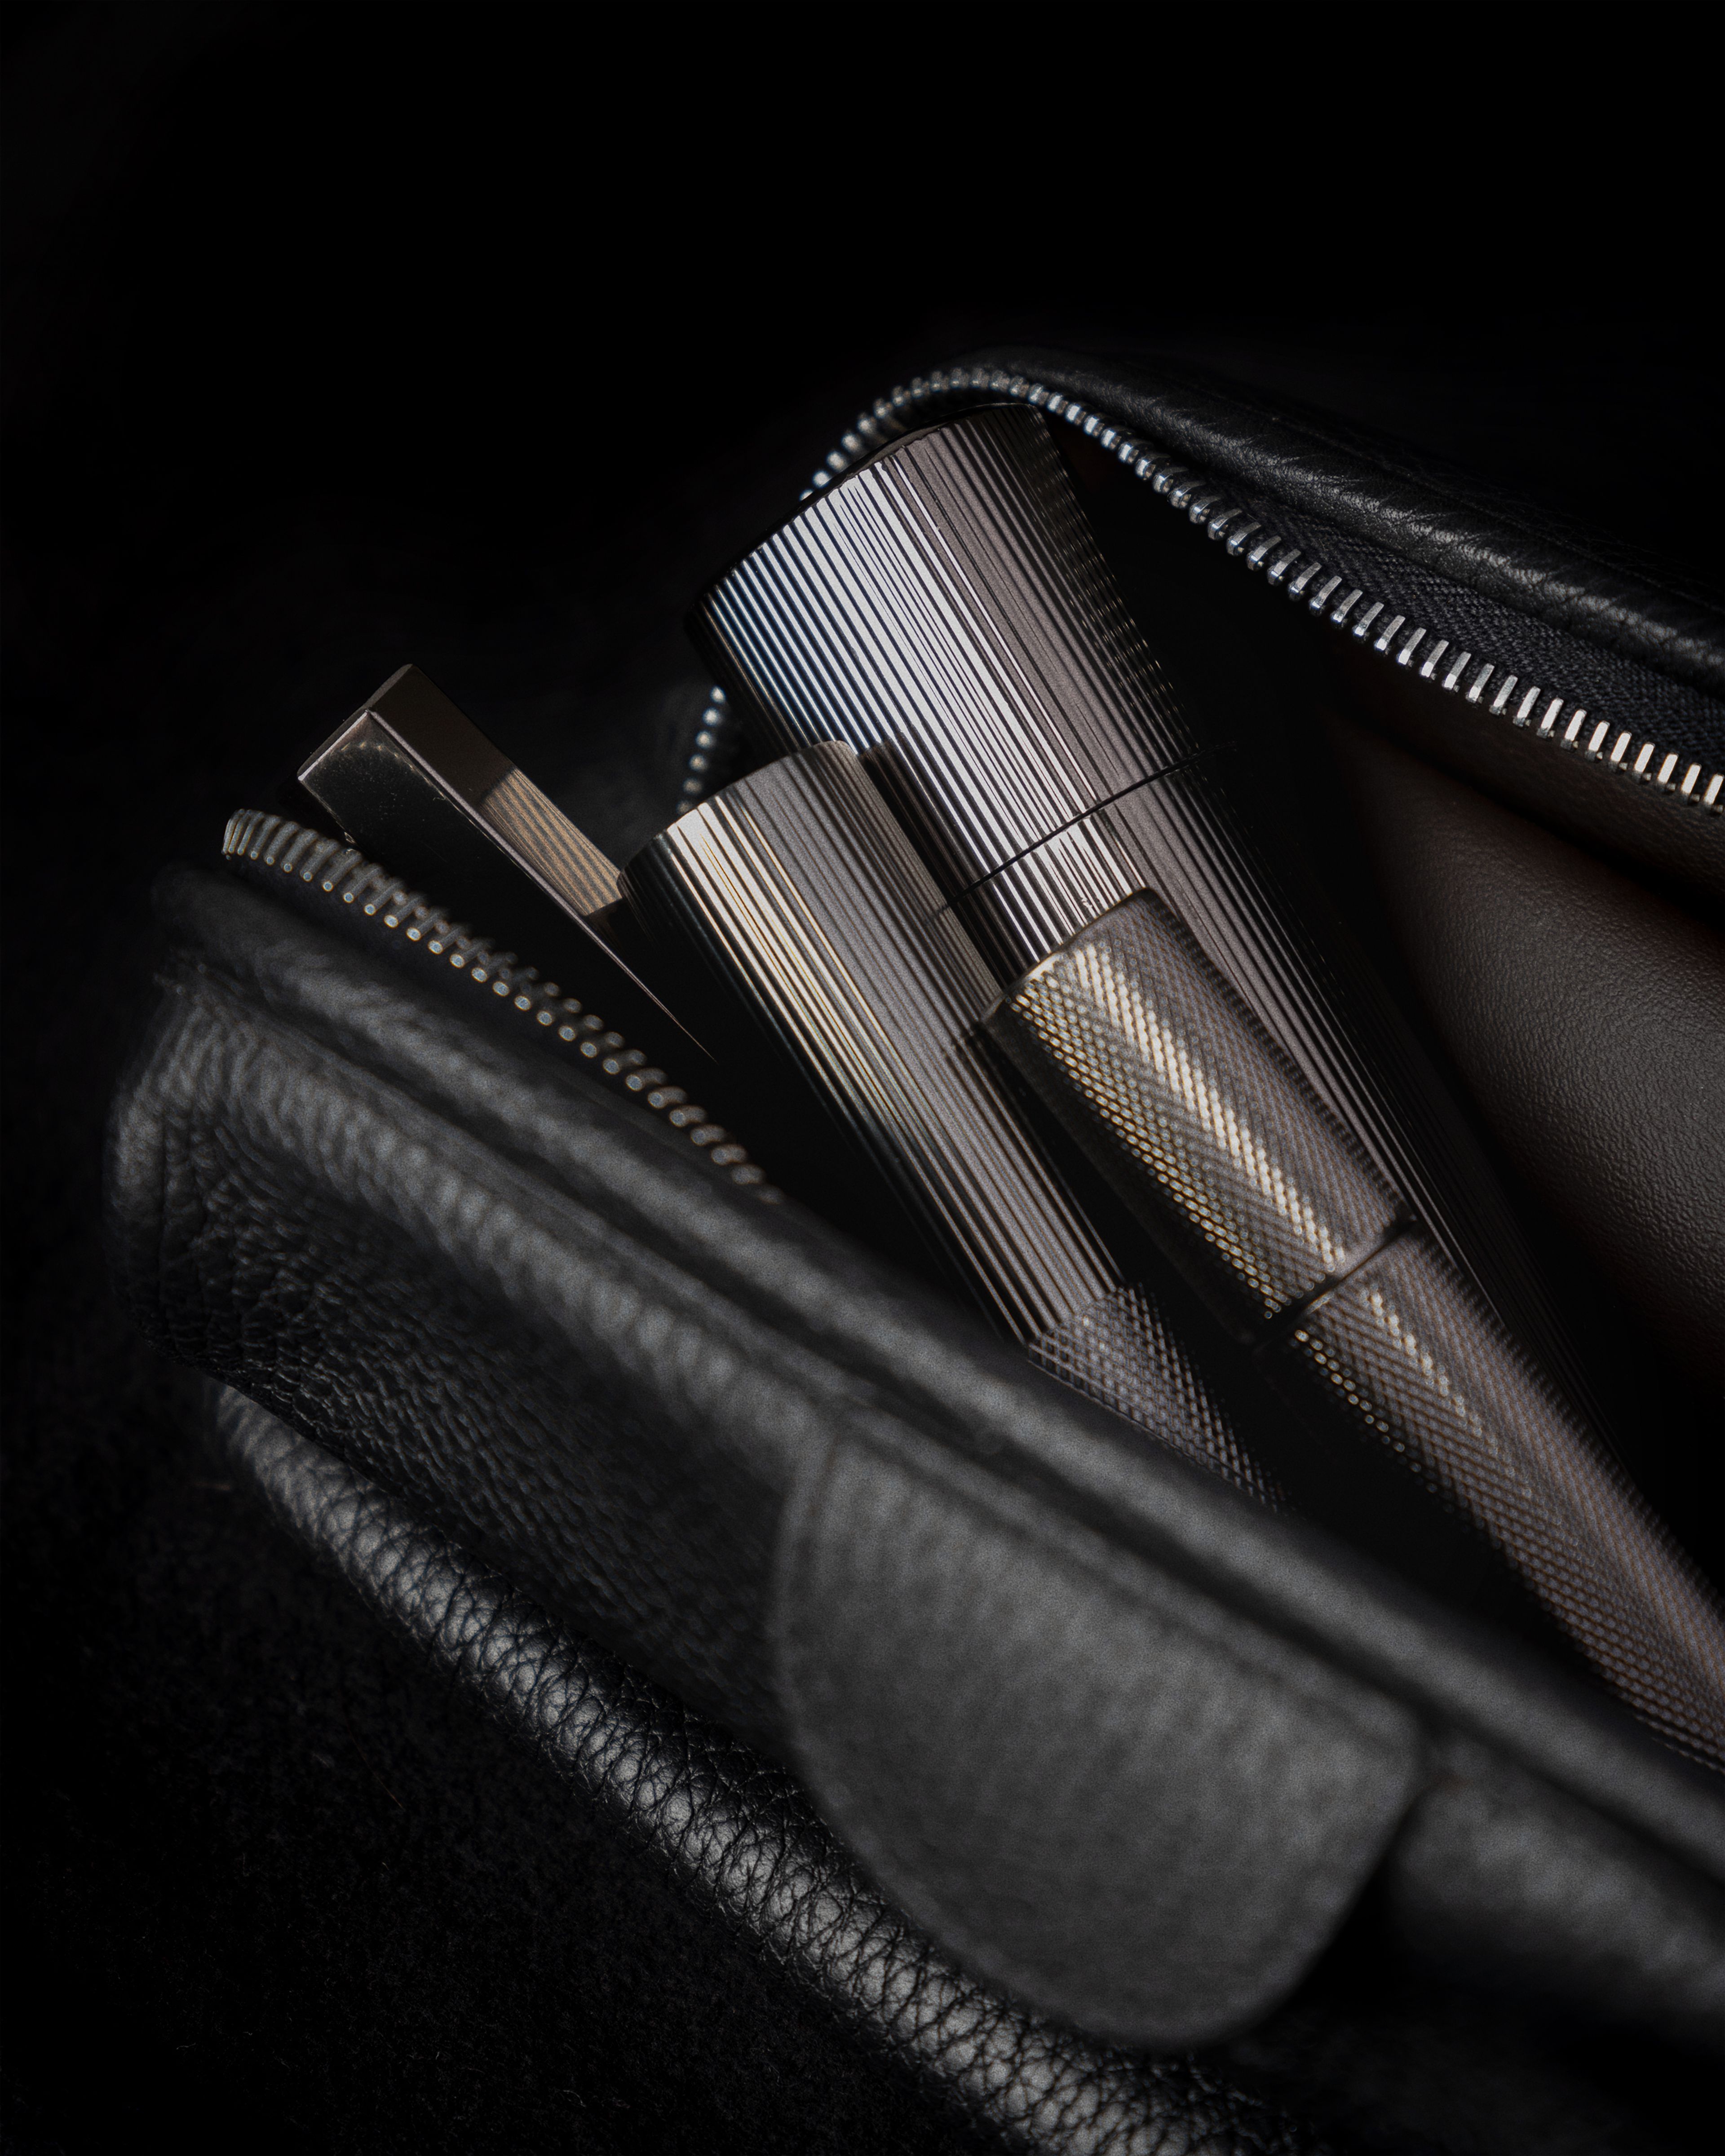 Men's concealer, moisturizer, eye cream and lip balm laying in a black leather toiletry bag.